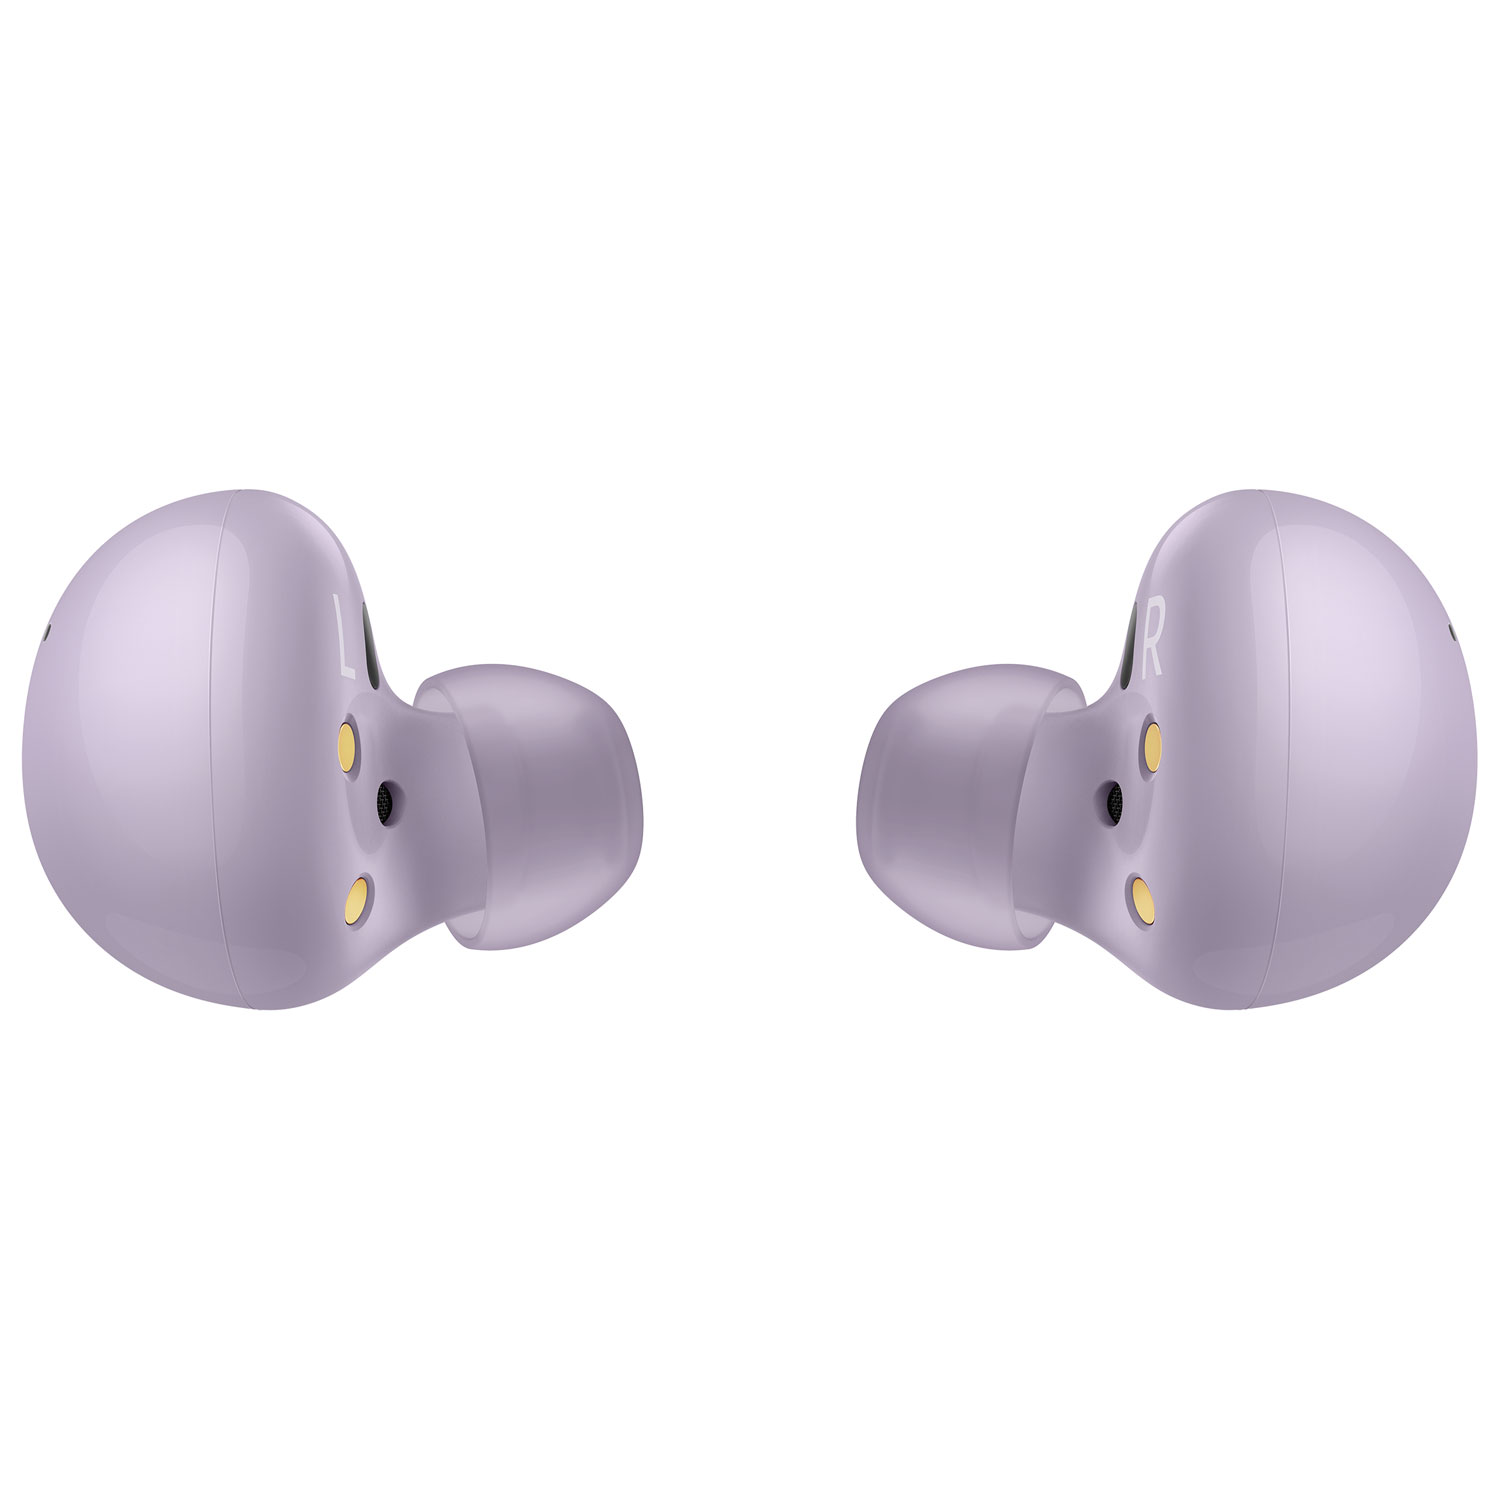 Samsung Galaxy Buds2 In-Ear Noise Cancelling True Wireless Earbuds -  Lavender